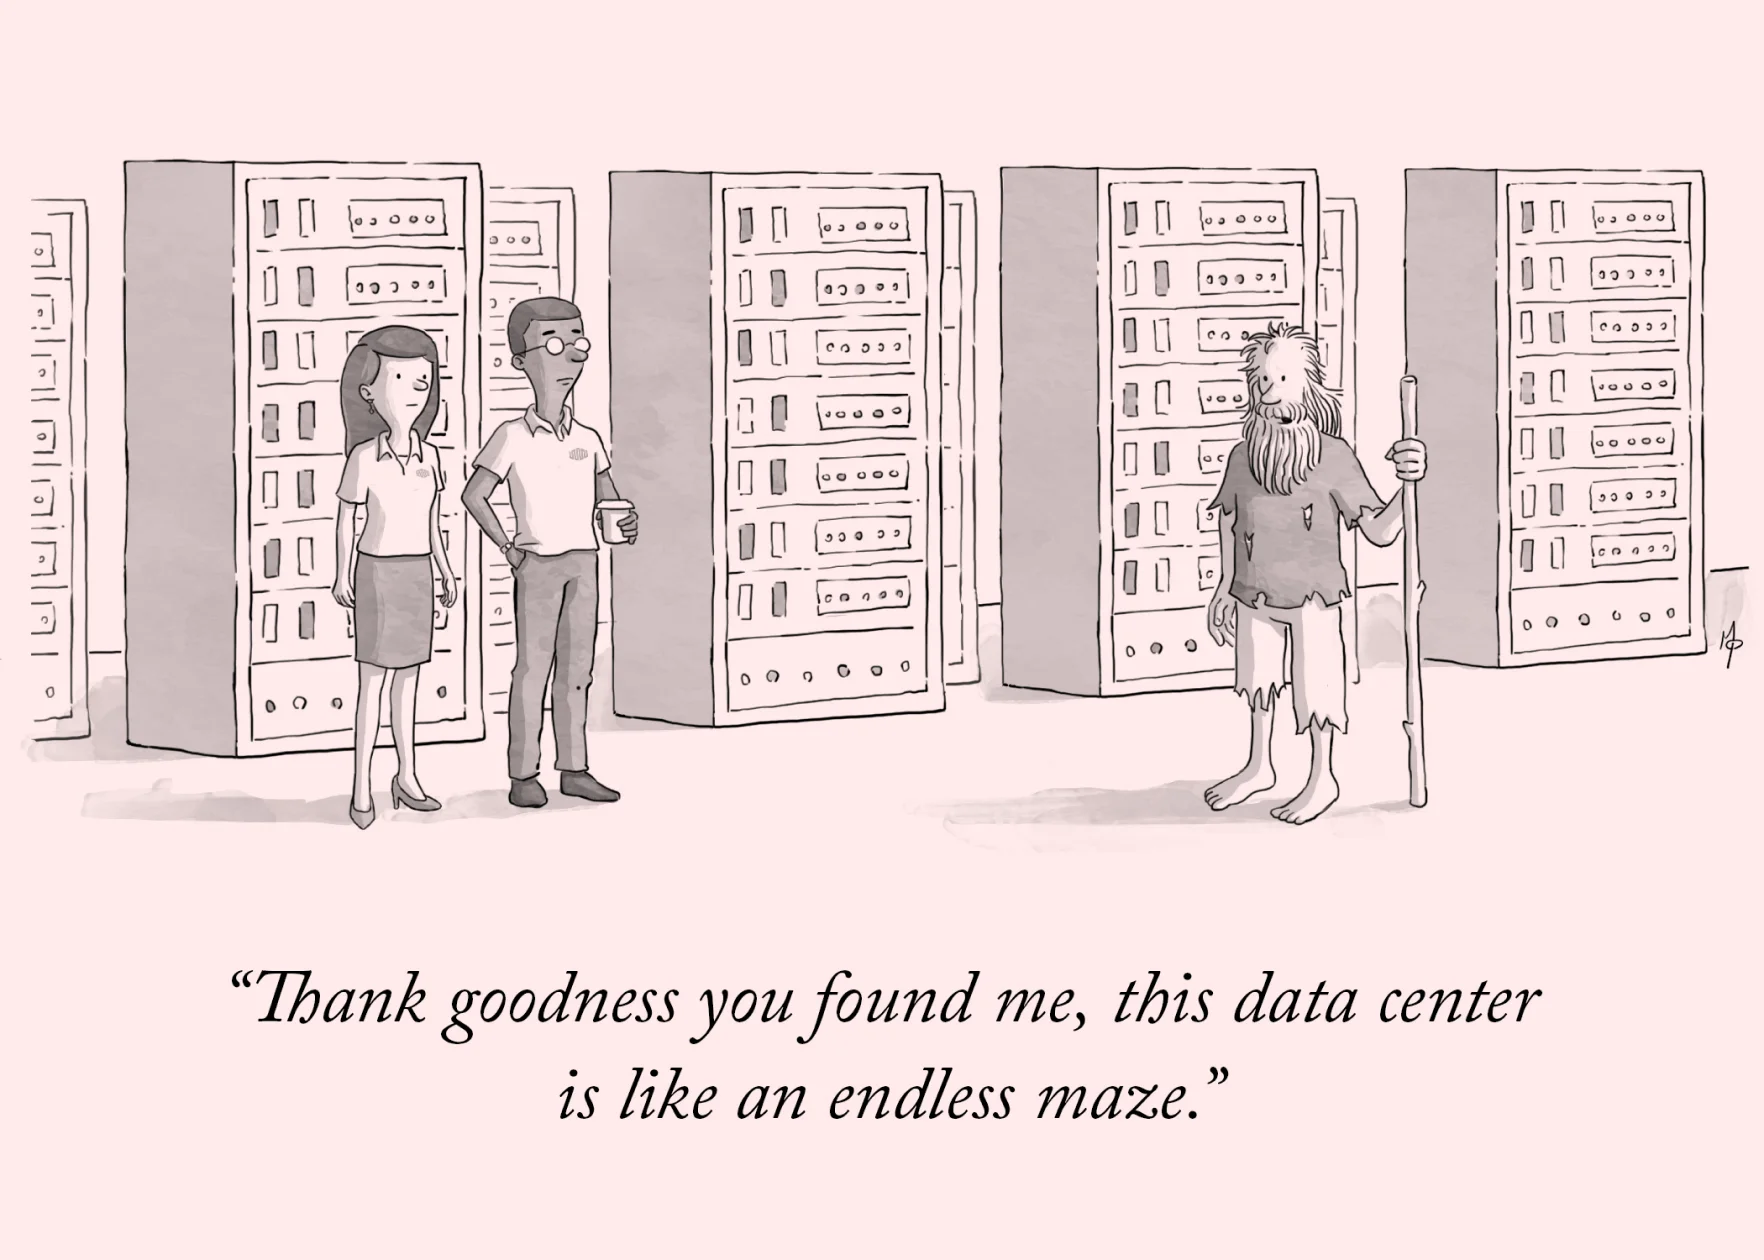 A cartoon-style illustration of 3 people in a data center. One of them looks disheveled. He is speaking. The caption reads: Thank goodness you found me, this data center is like an endless maze.